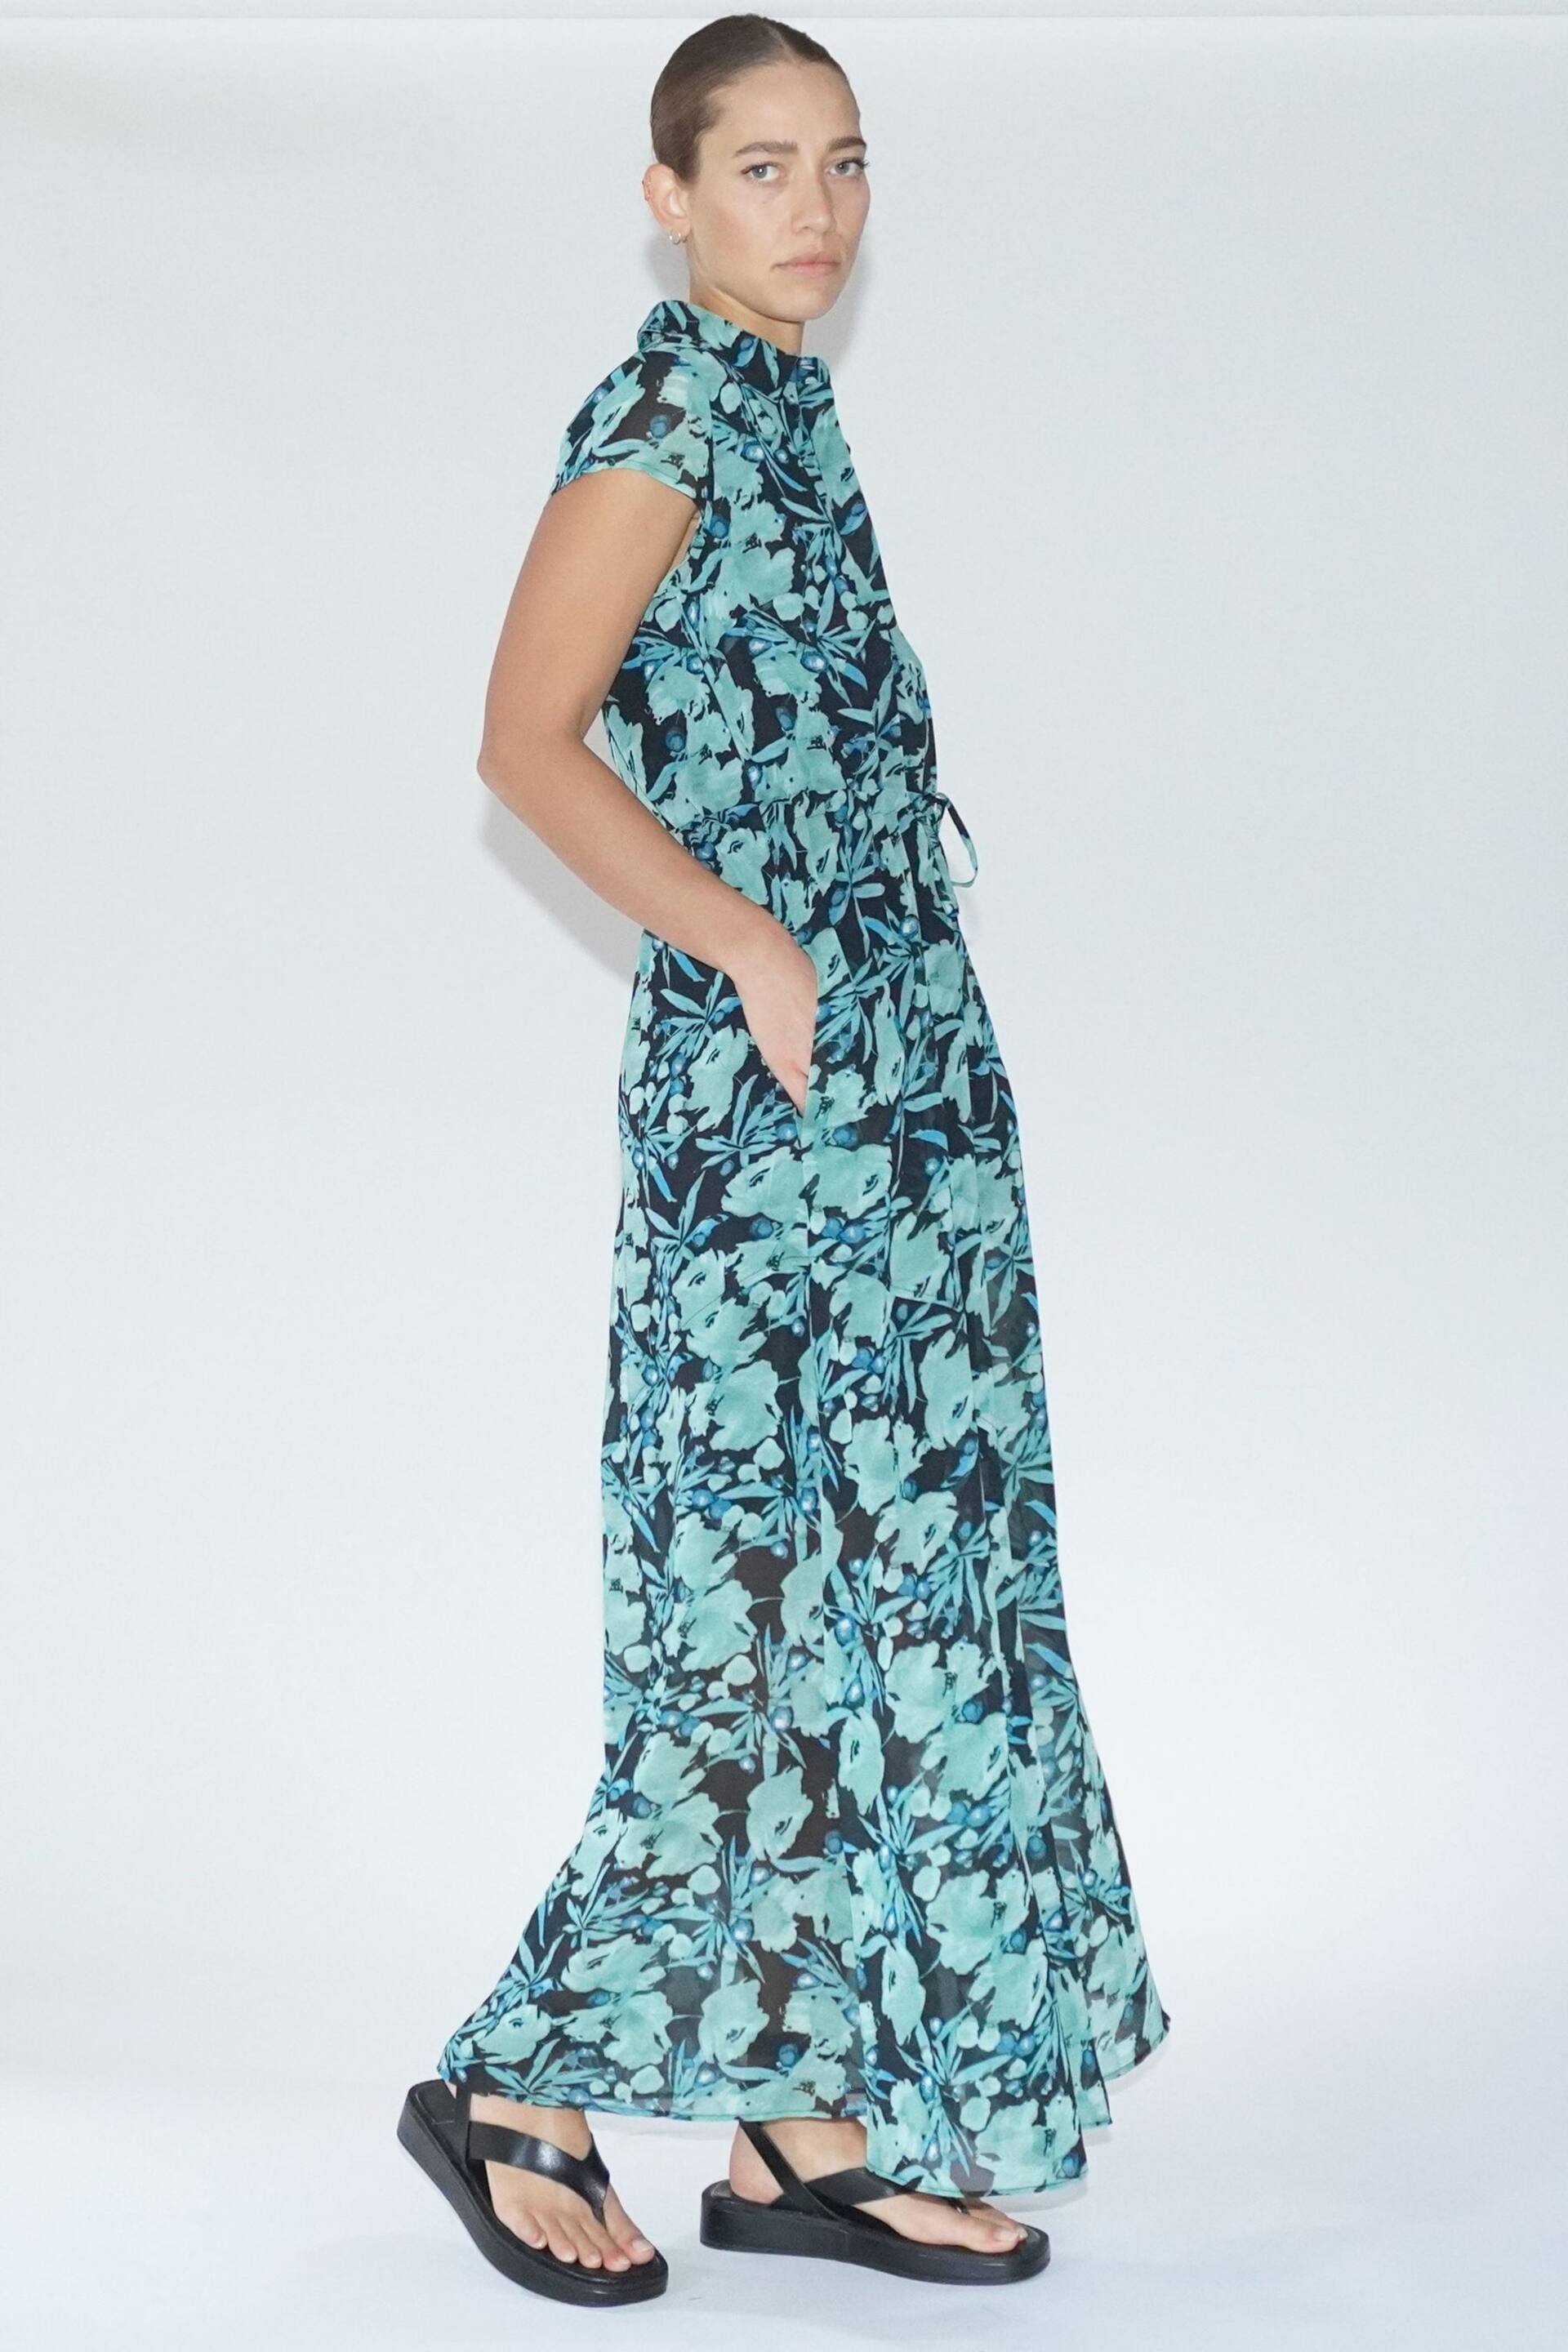 Religion Green Floral Maxi Midi Shirt Dress With Tie Waist - Image 6 of 7